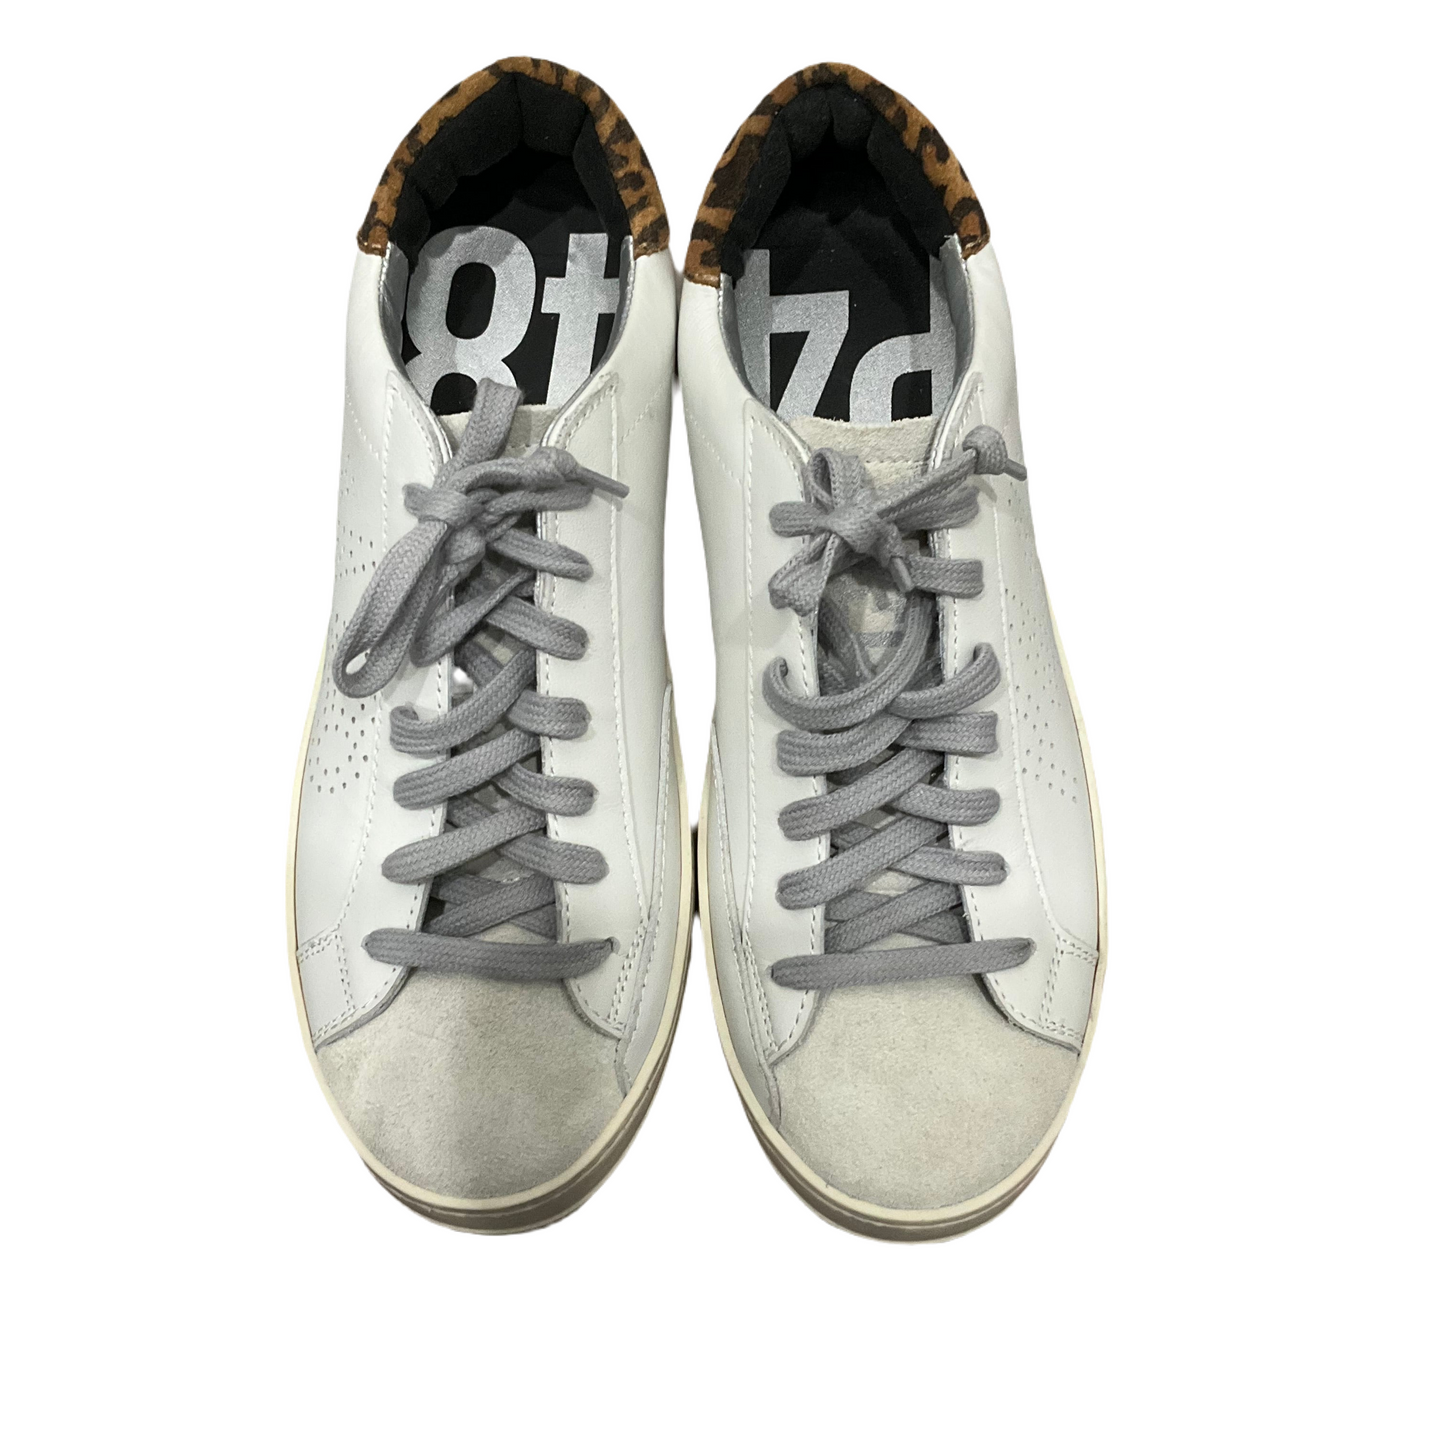 White Shoes Sneakers P448, Size 9